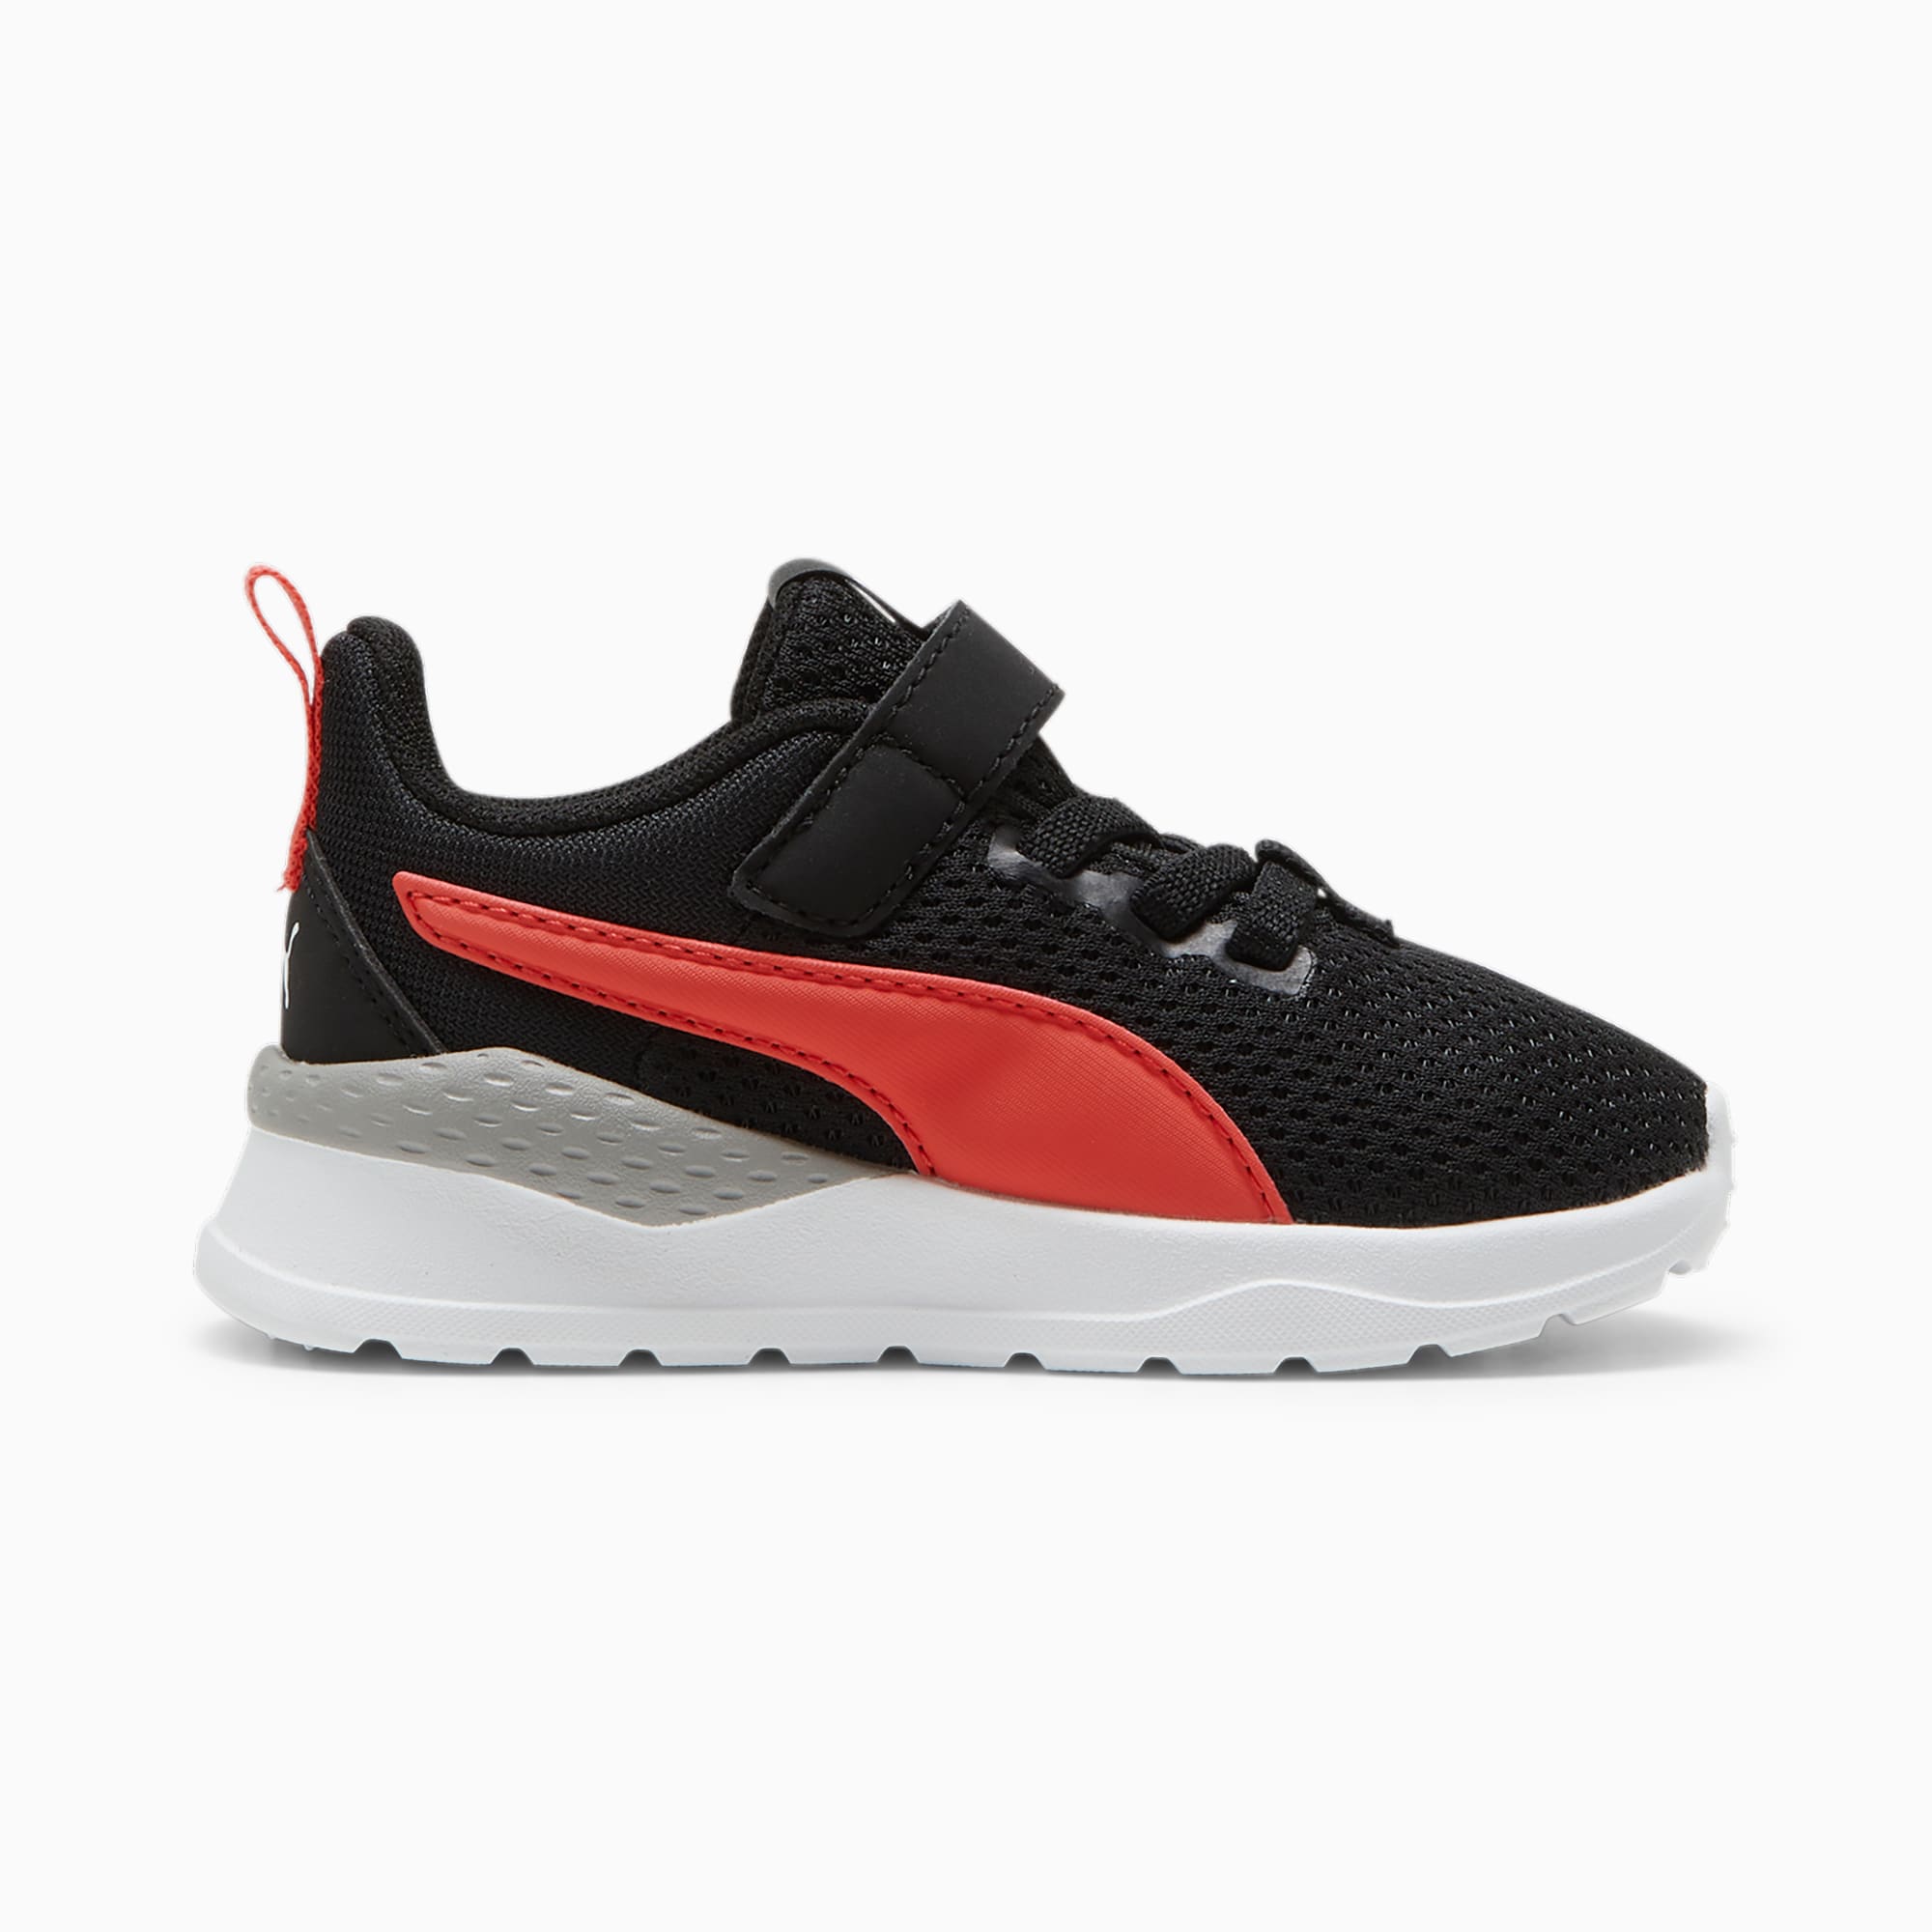 PUMA Anzarun Lite Babies' Trainers, Black/Active Red/White, Size 19, Shoes